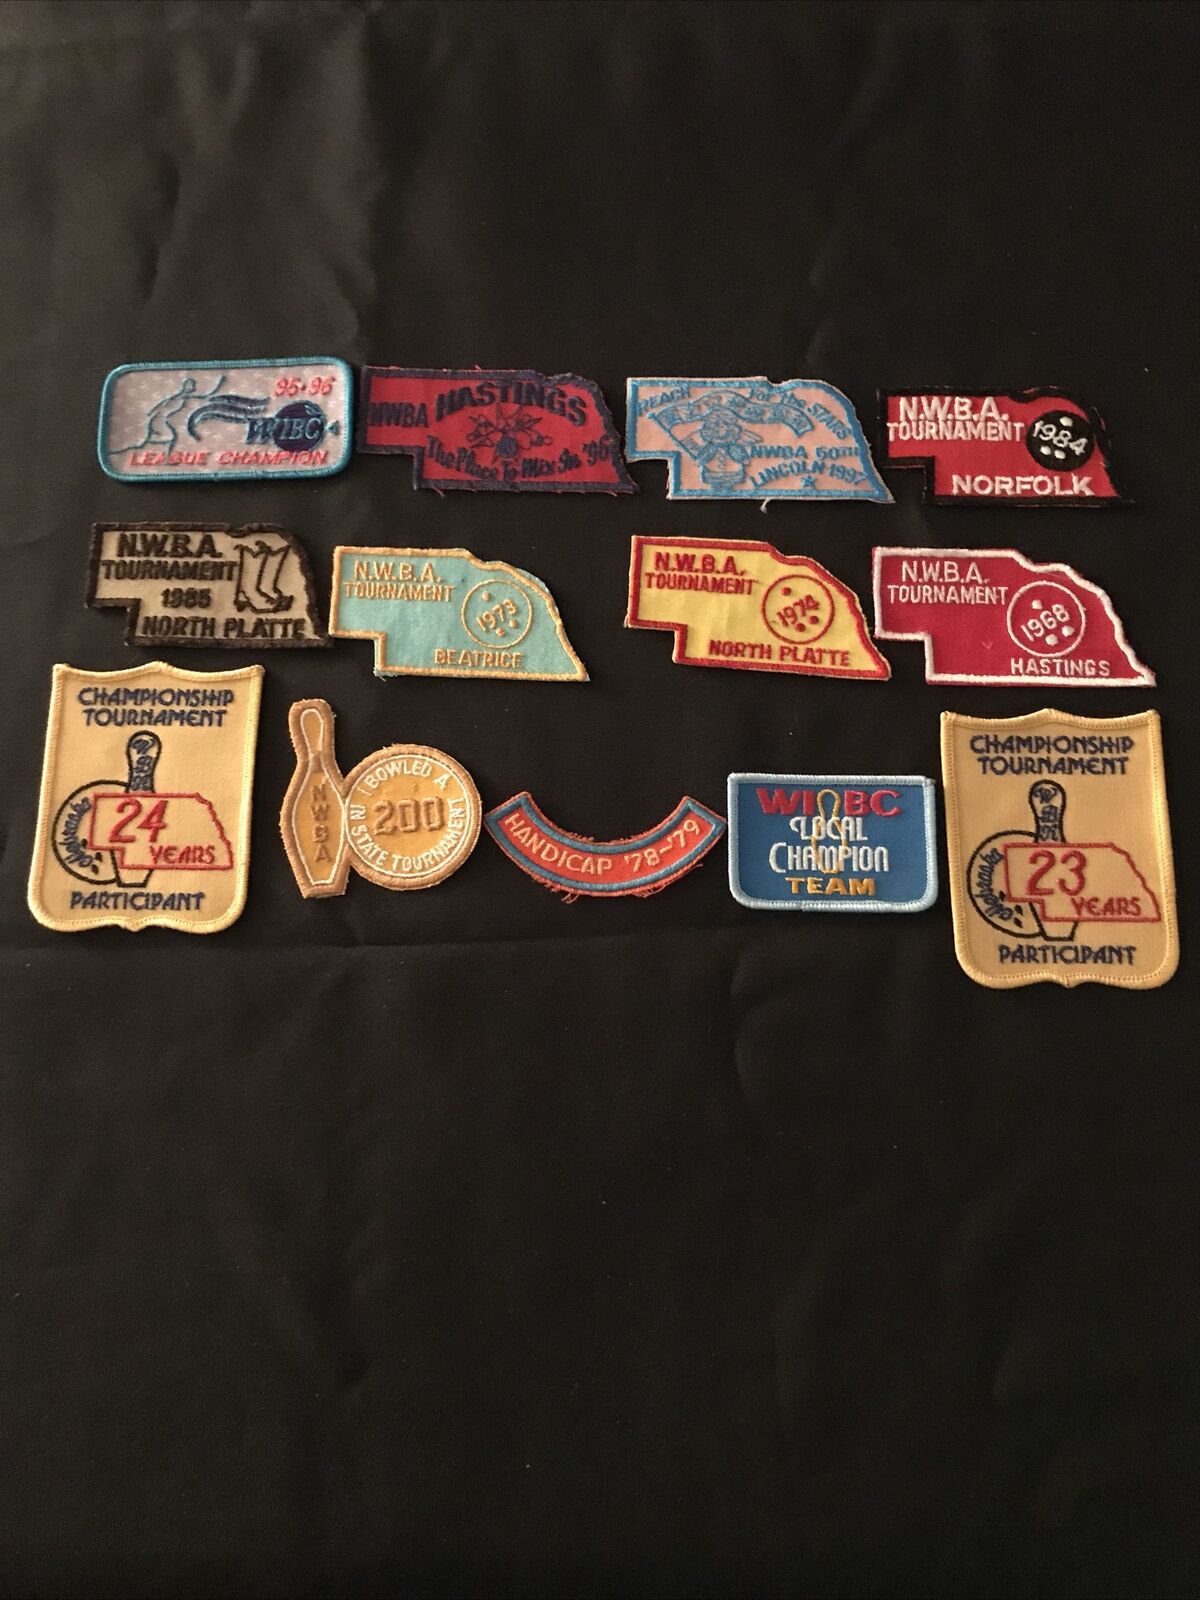 LOT of 13 VINTAGE RETRO Collectible Nebraska Women’s Bowling Patches, 1960-90’s